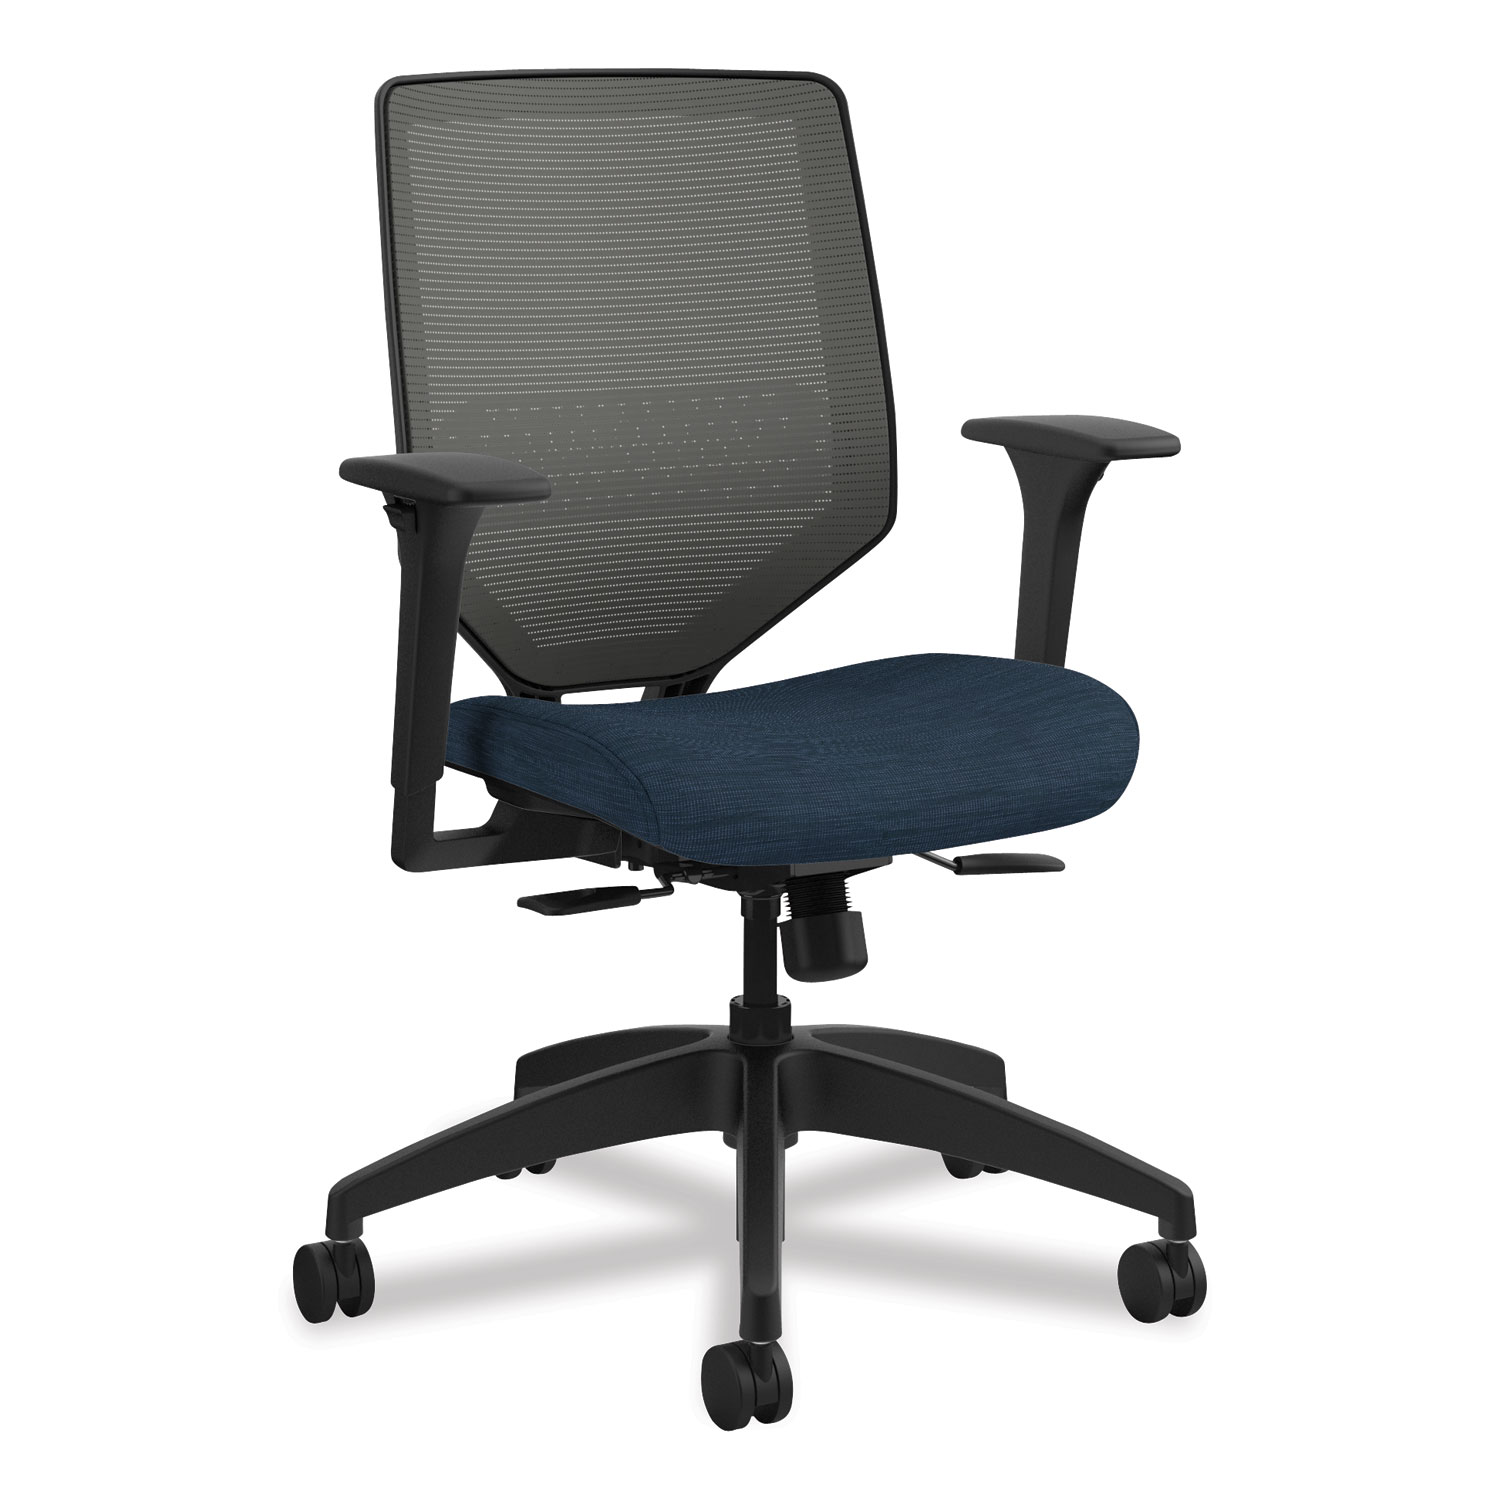  HON HONSVM1ALICC90T Solve Series Mesh Back Task Chair, Supports up to 300 lbs., Midnight Seat, Charcoal Back, Black Base (HONSVM1ALICC90T) 